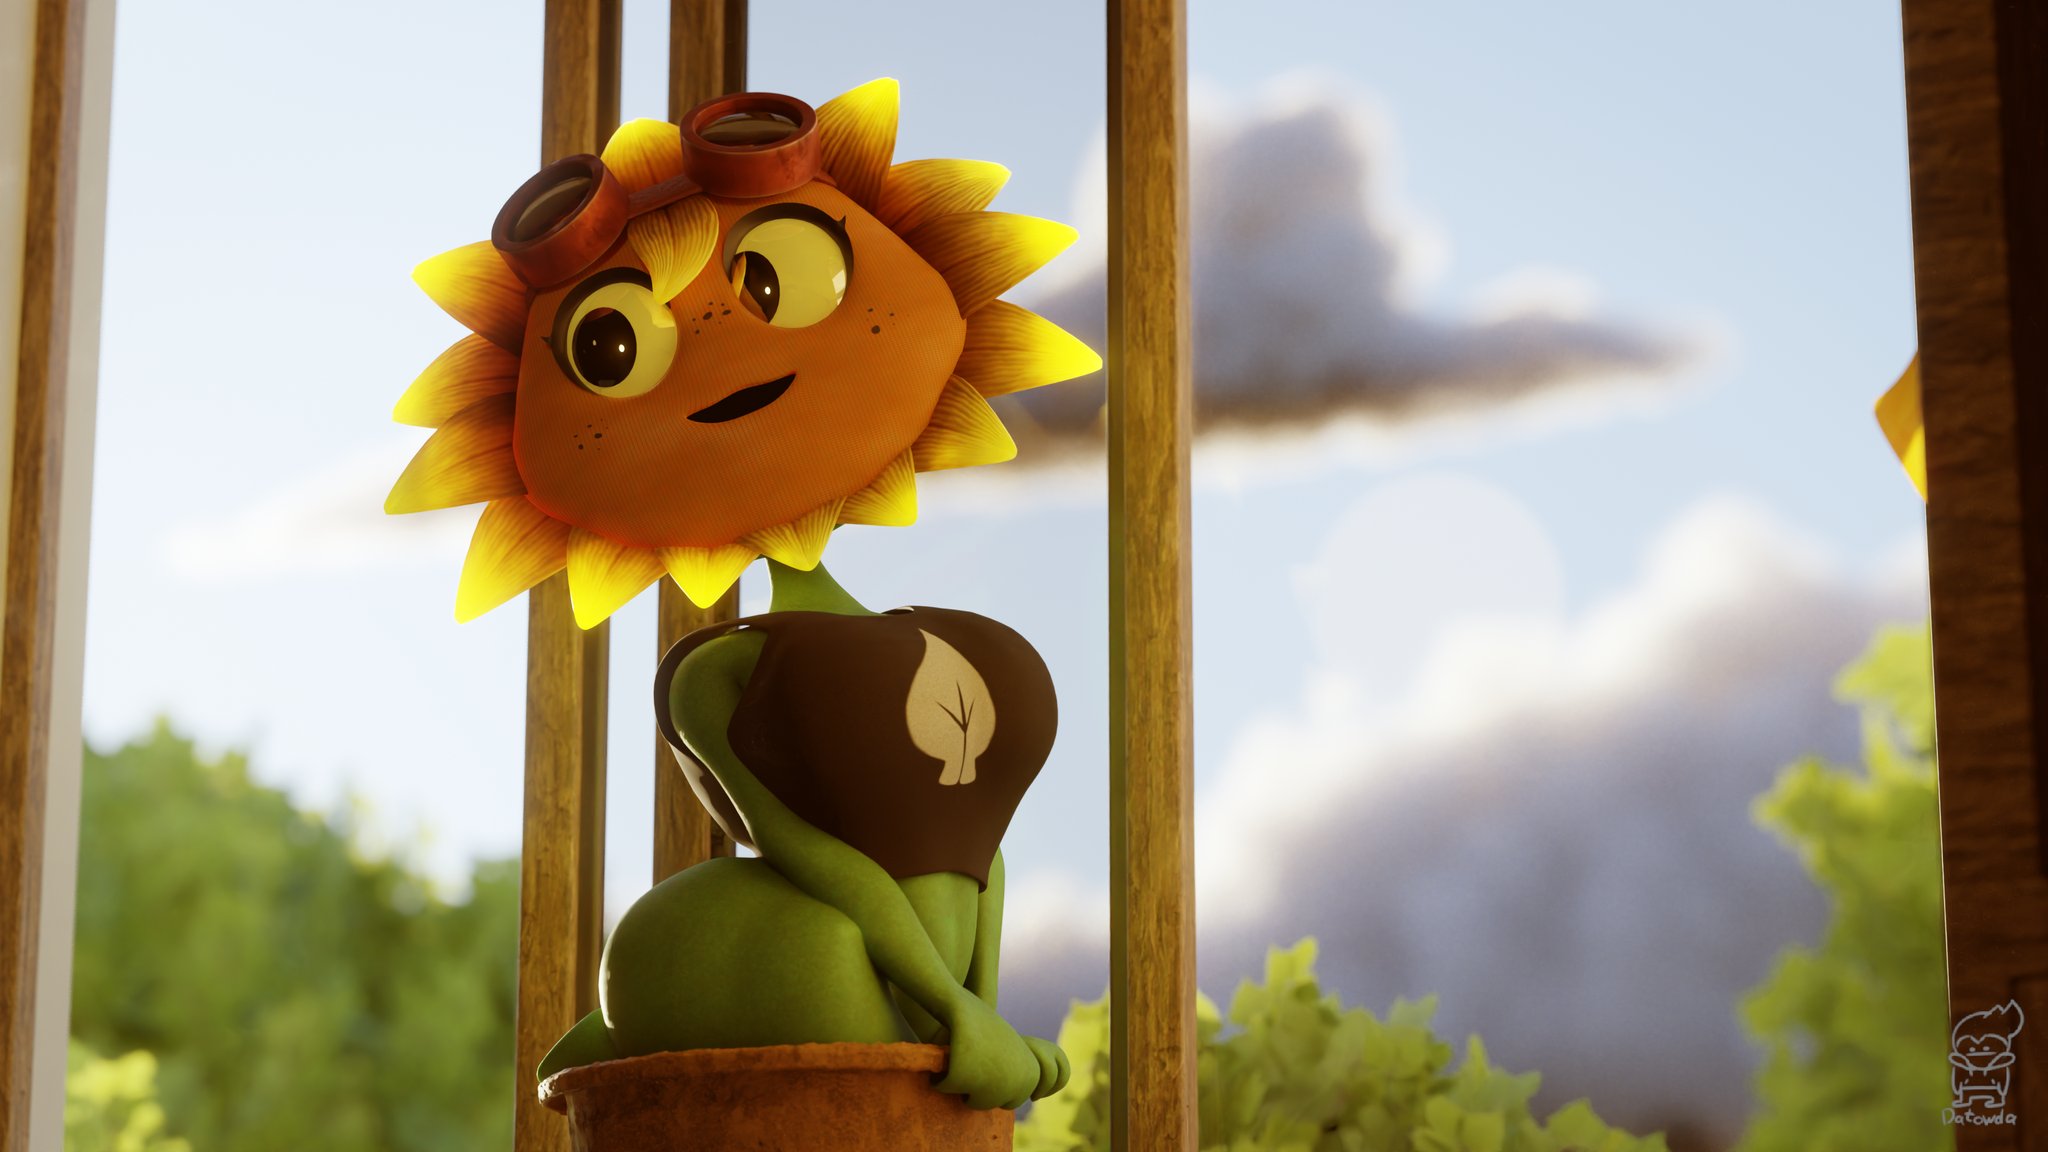 Datowda Arts (Comms closed) Flare sunbathing Epic drawing right there, done #b3D #pvz #plantsvszombies